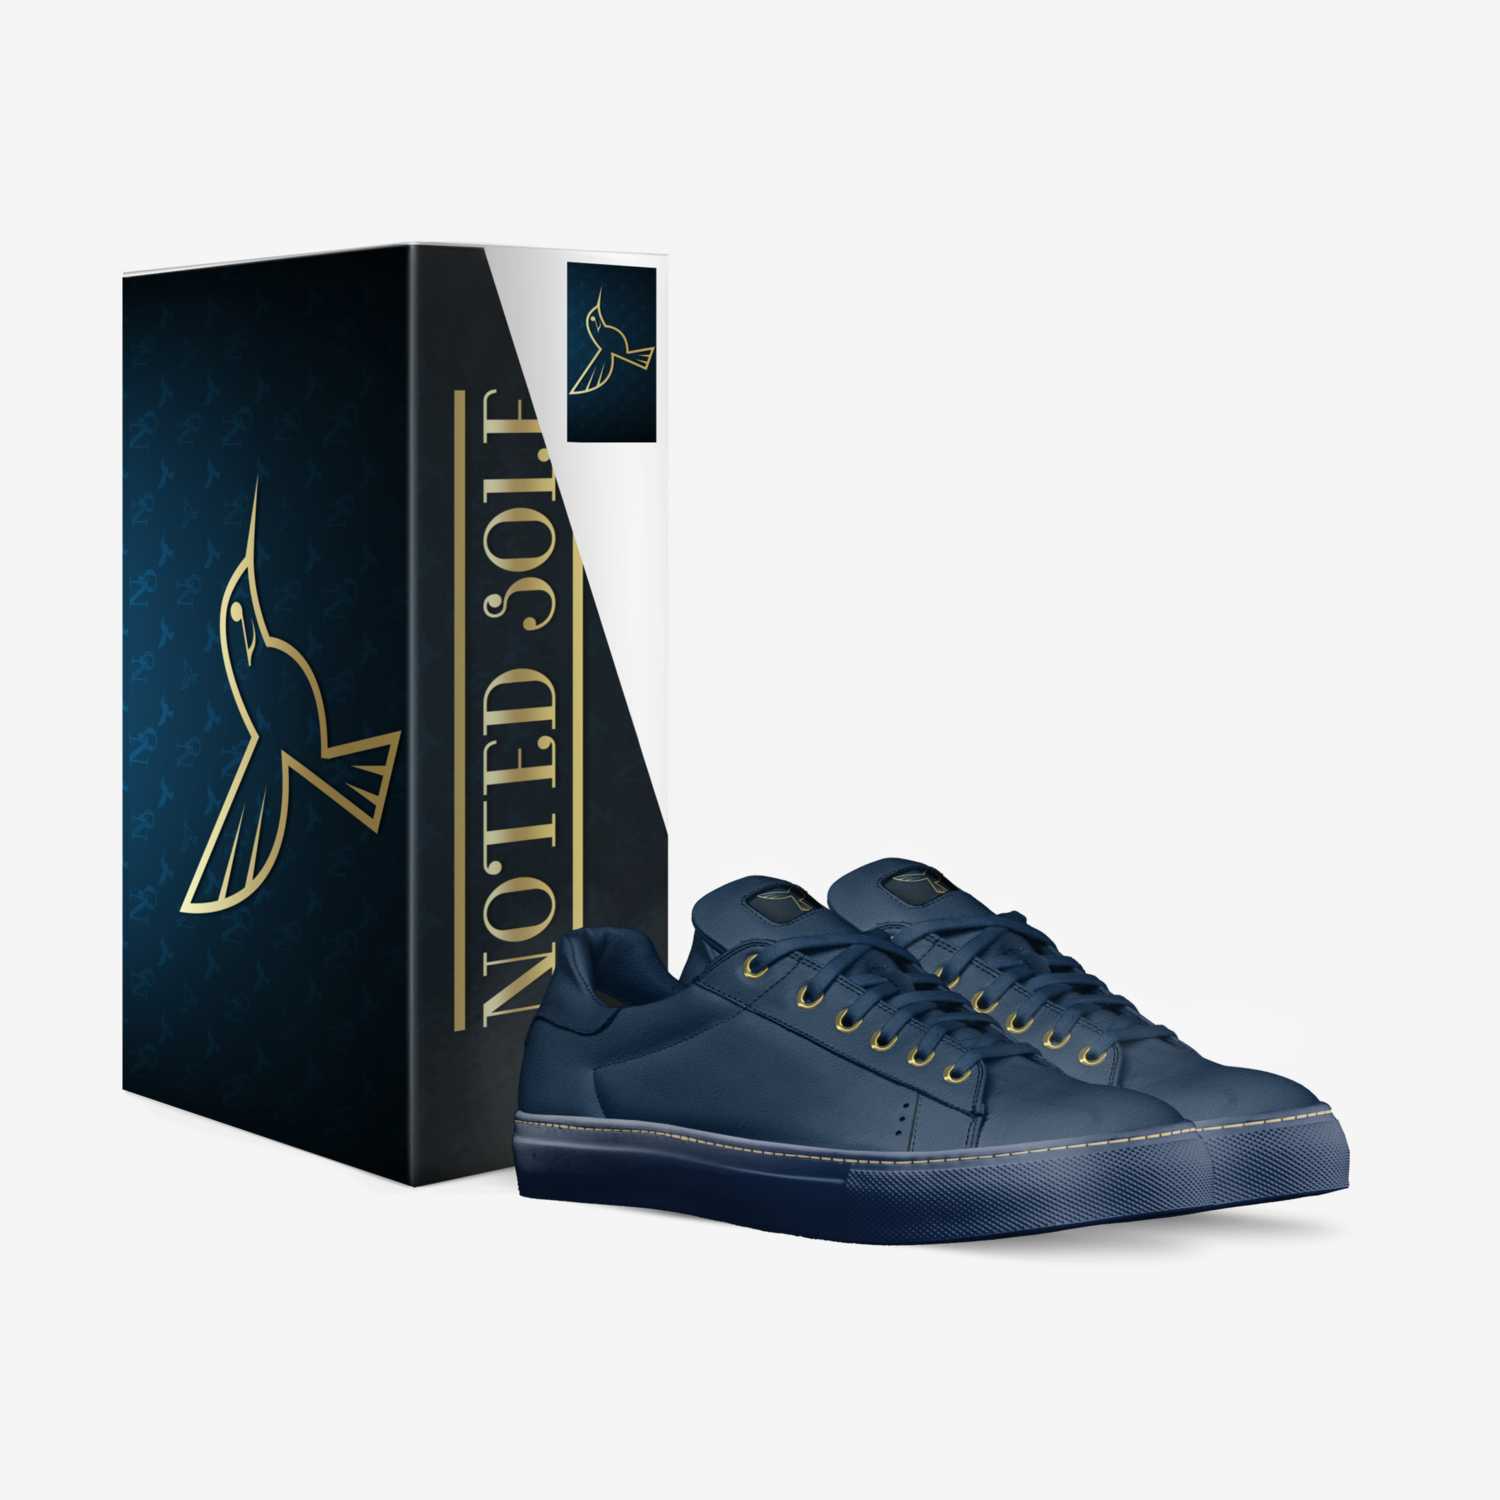 Blue Sole custom made in Italy shoes by Marcus Brooks | Box view